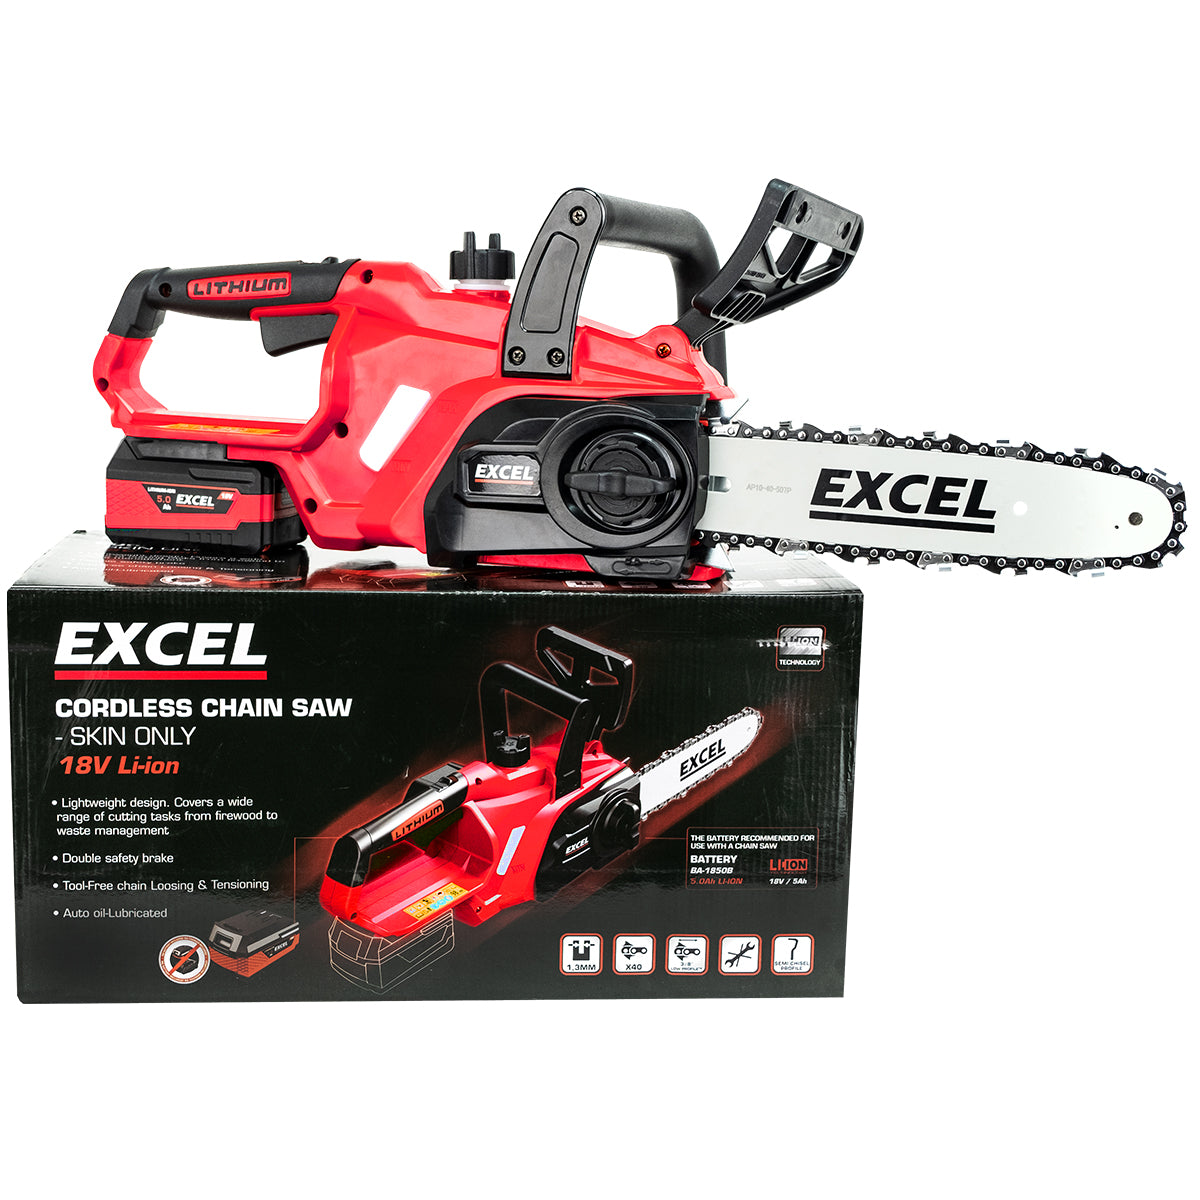 Excel 18V 245mm Chainsaw Wood Cutter Body Only (No Battery & Charger)